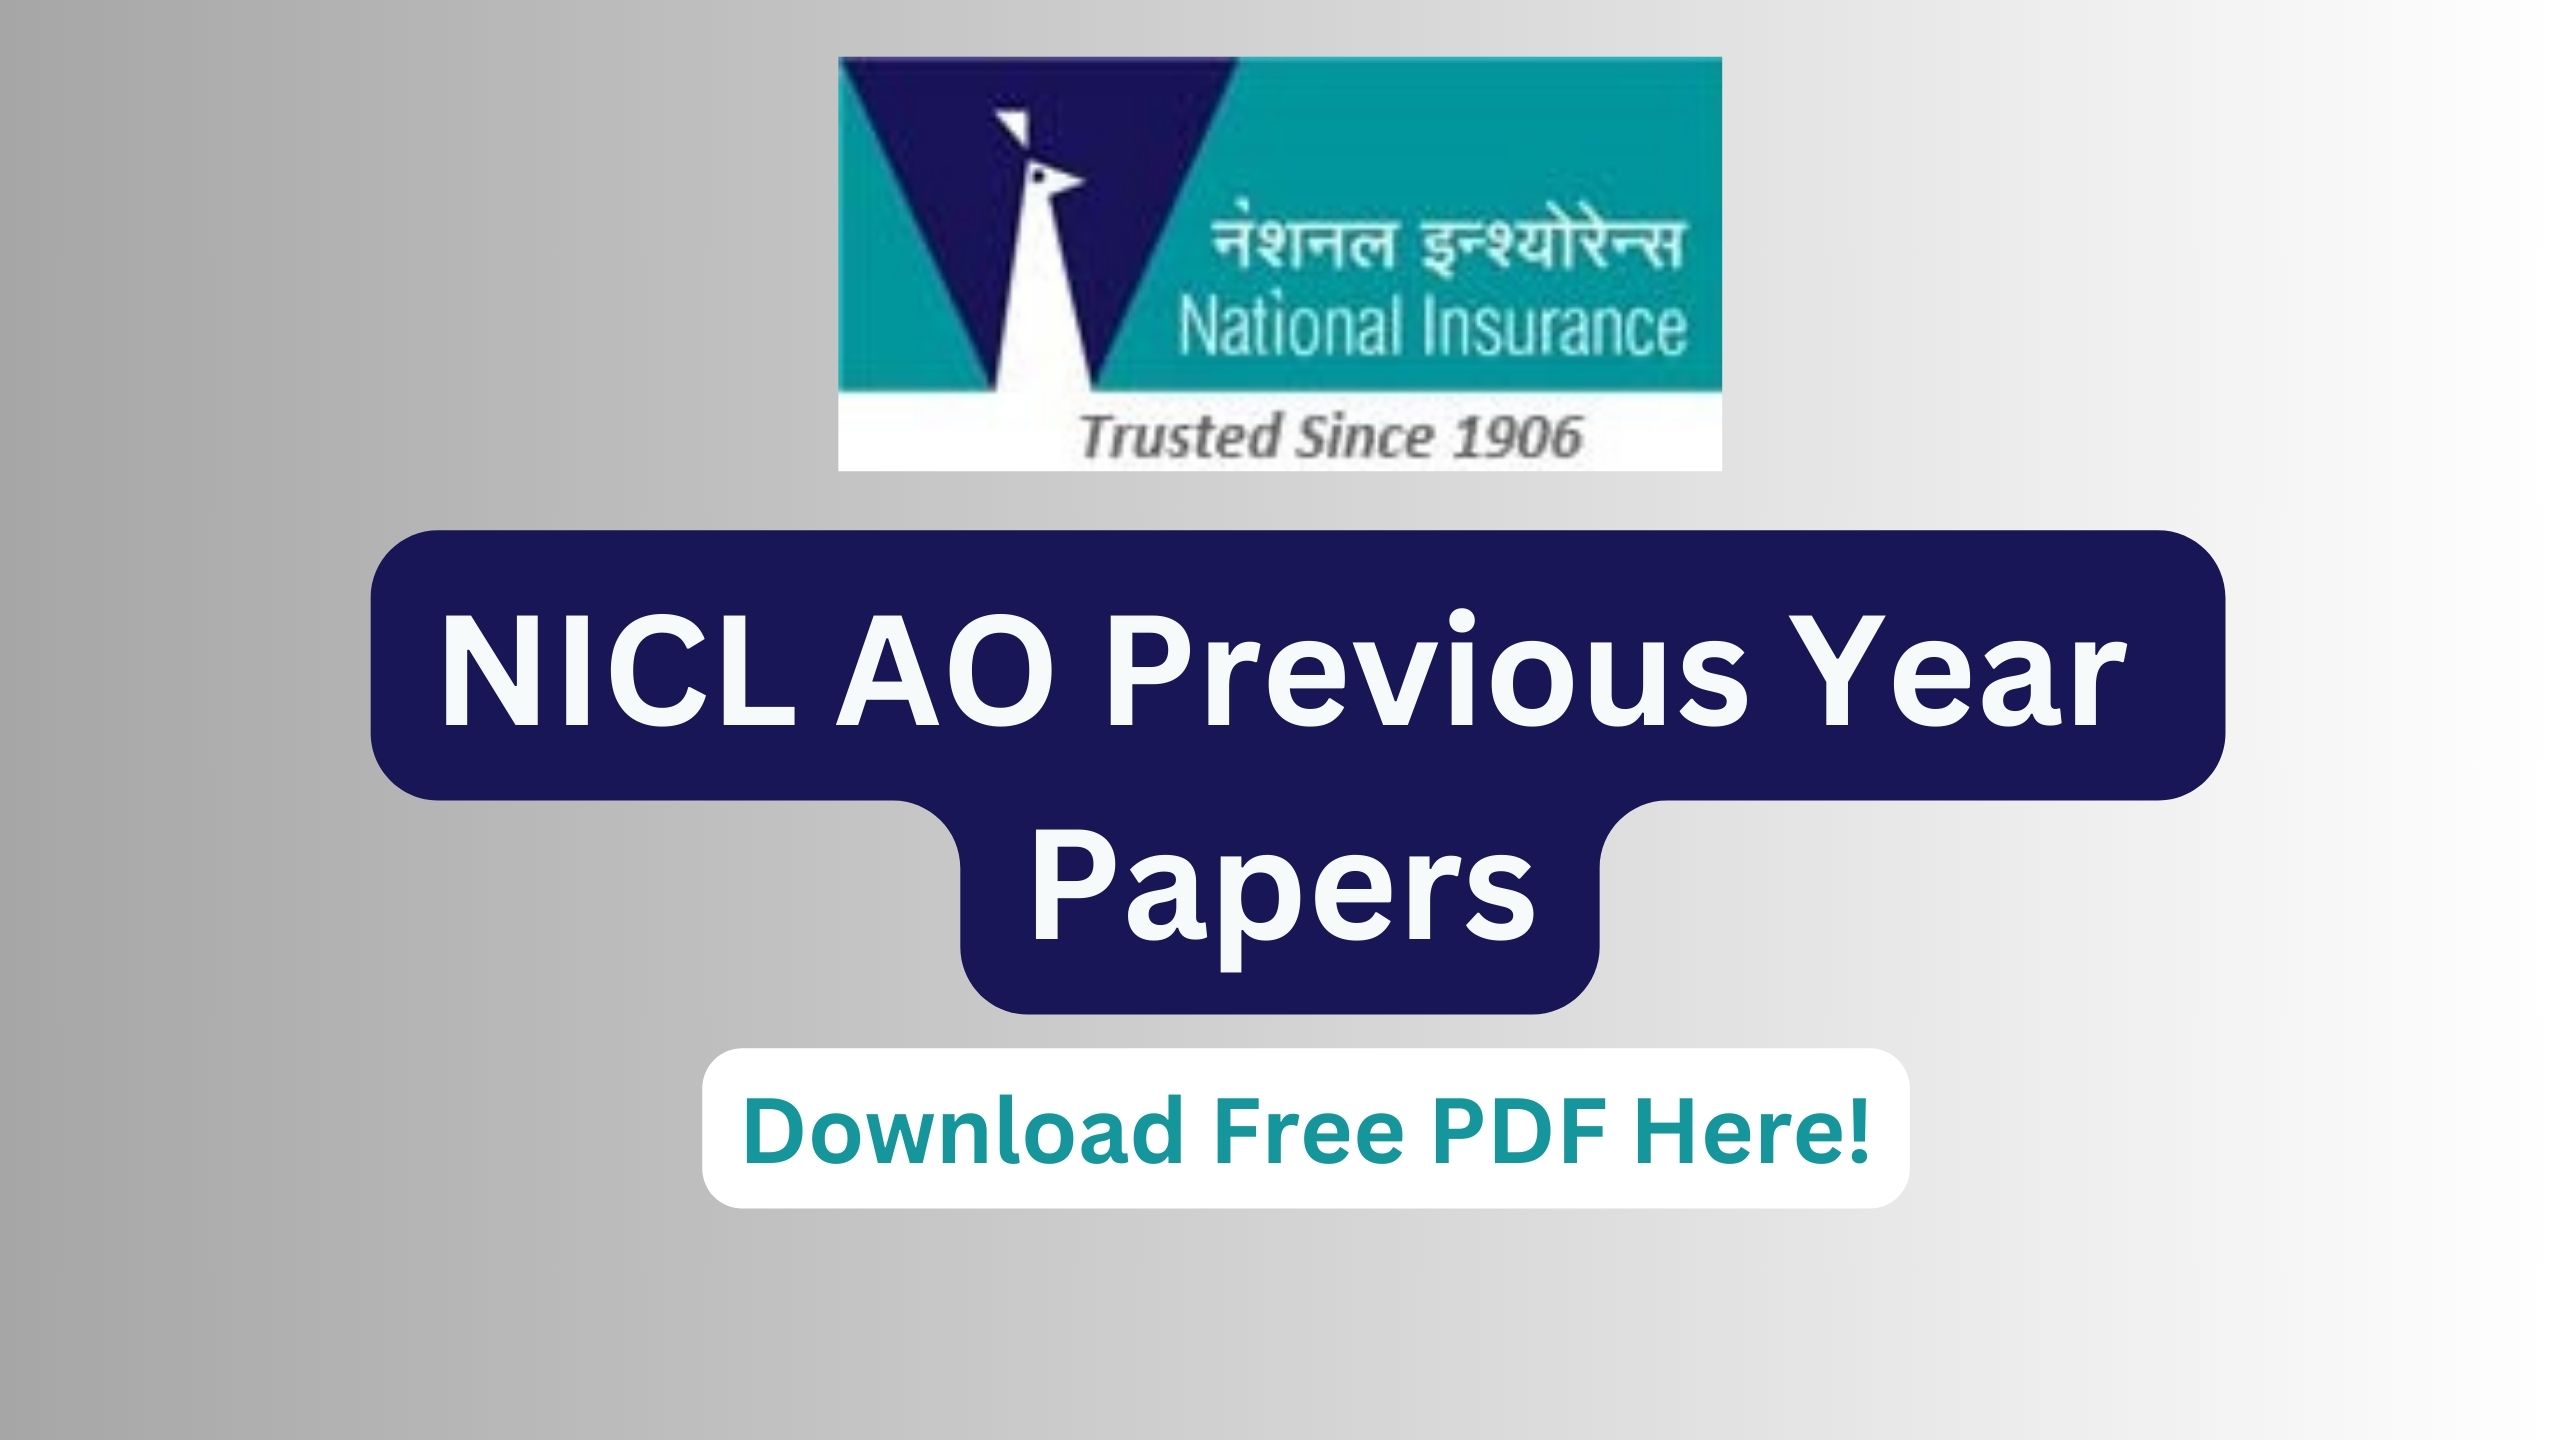 NICL AO Previous Year Papers